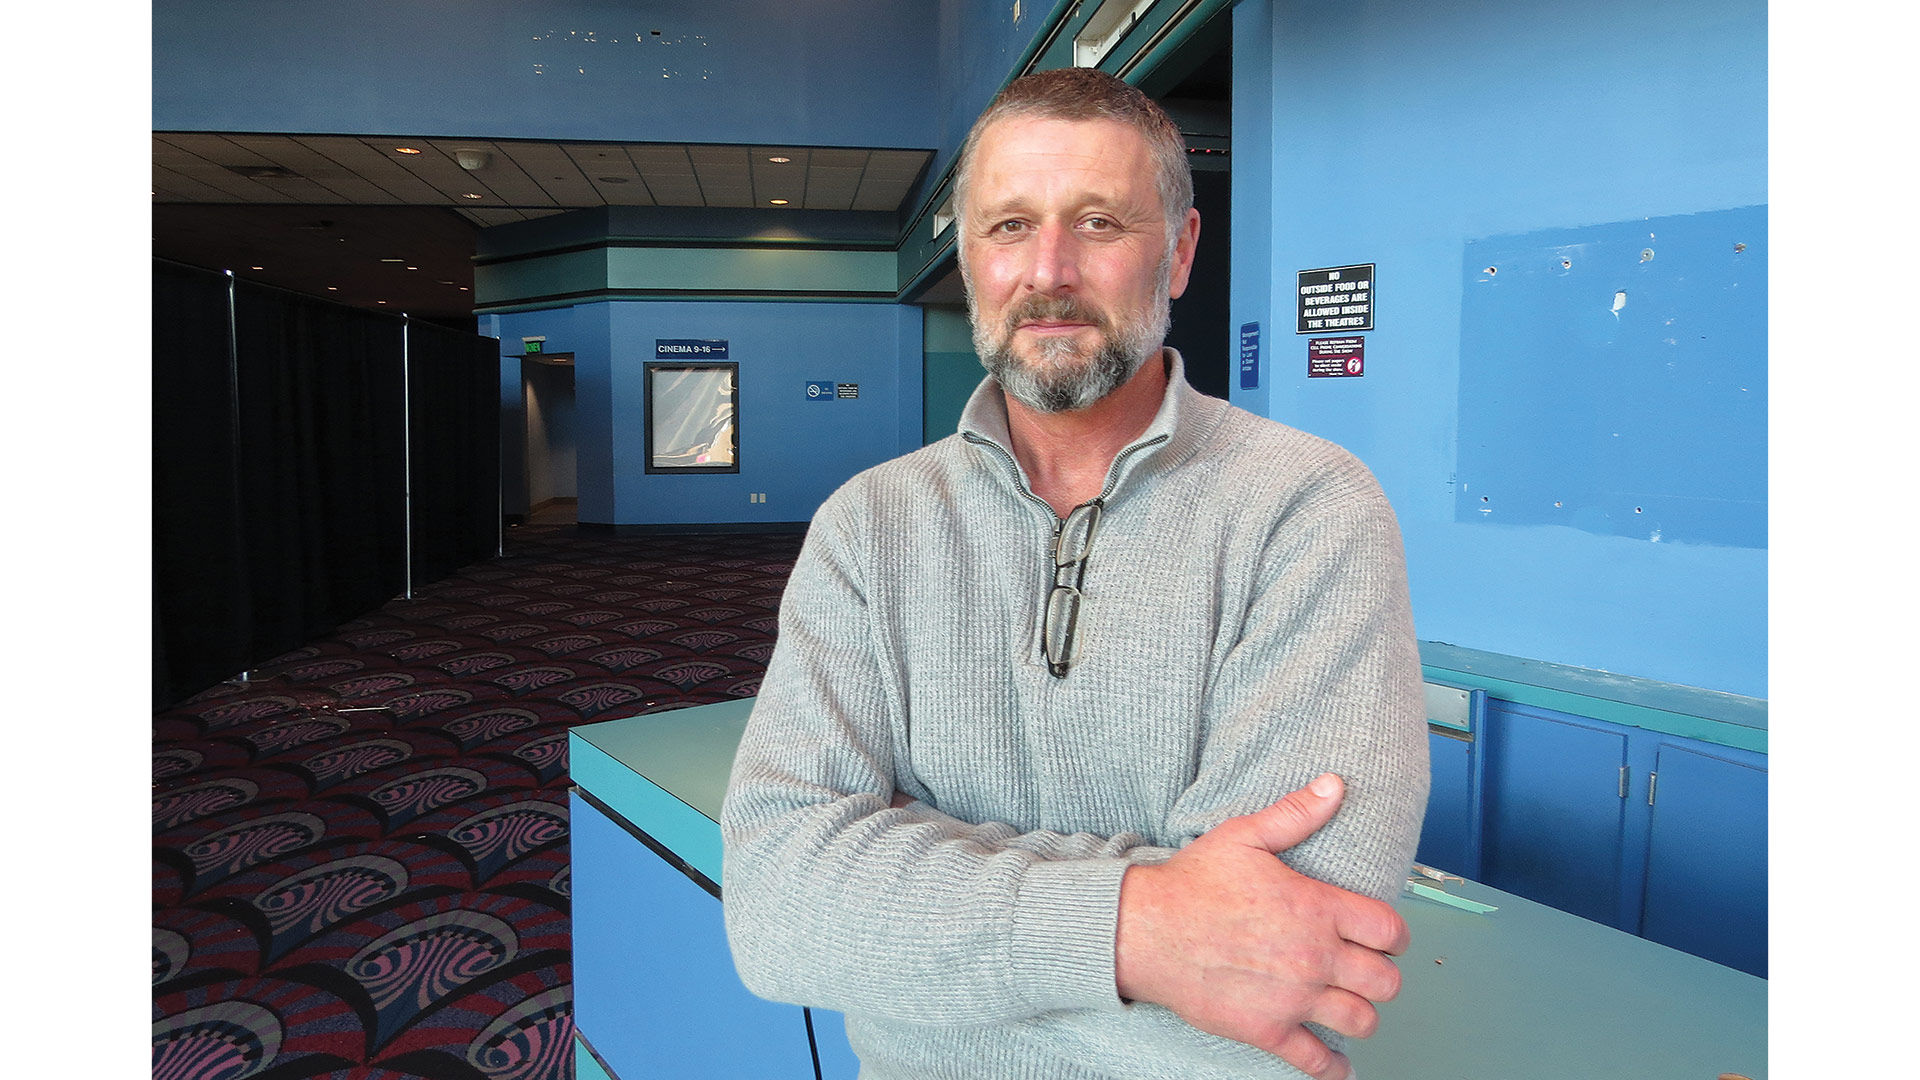 Dave Thompson stands in the lobby of the former Cinemark Theaters